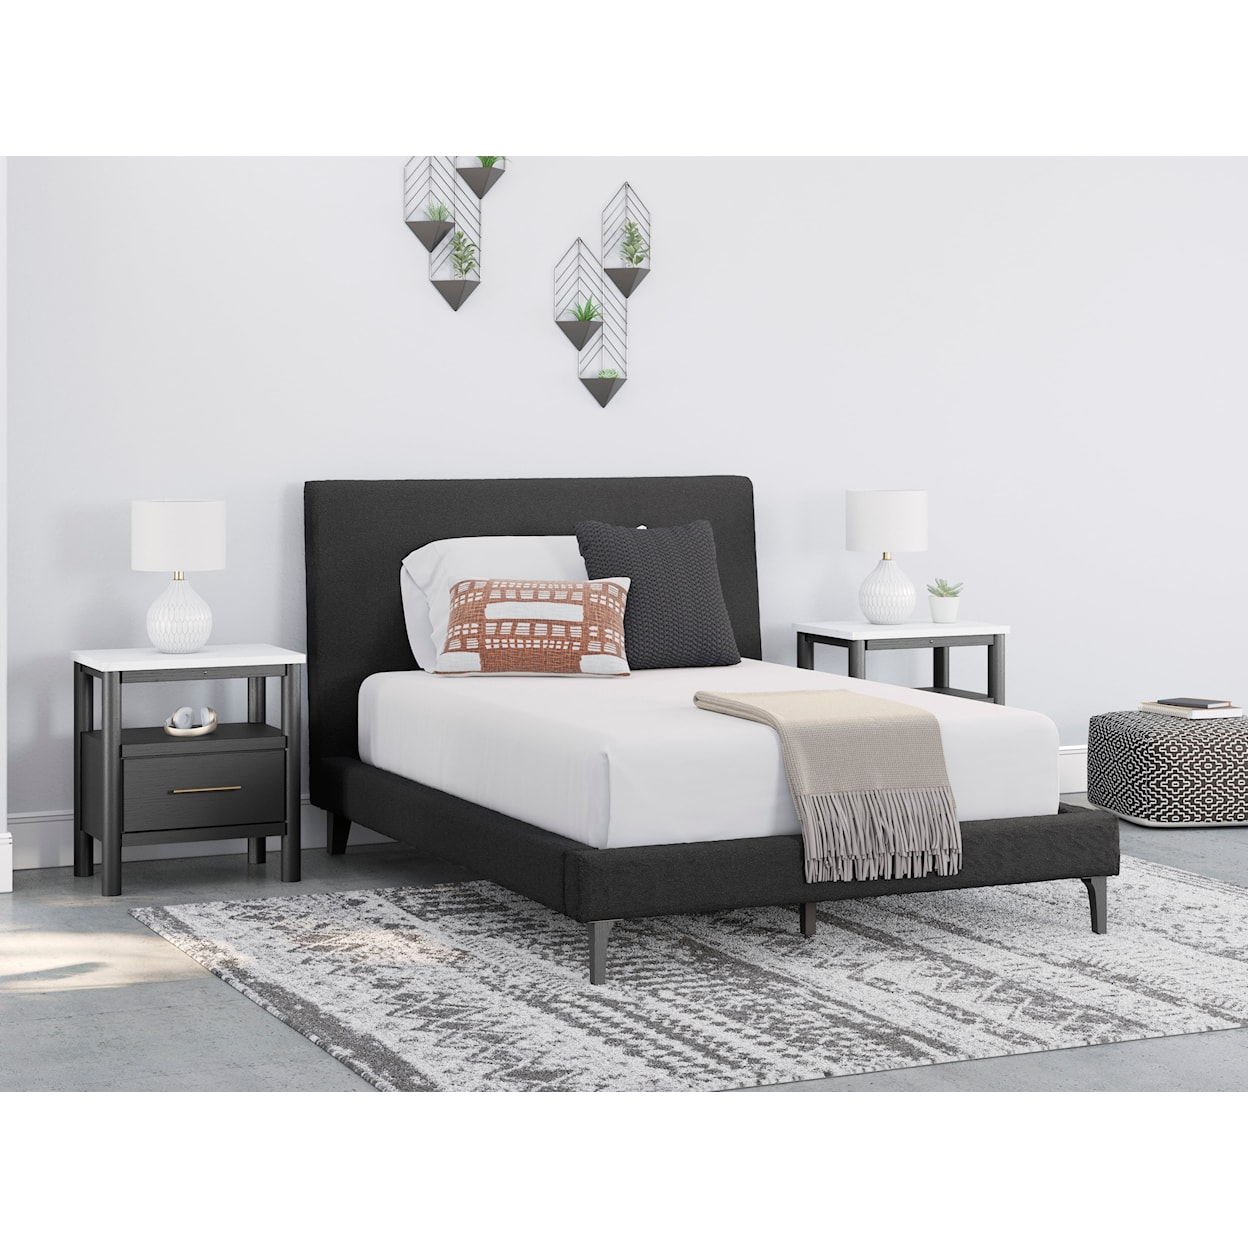 Signature Design by Ashley Cadmori Full Upholstered Bed With Roll Slats